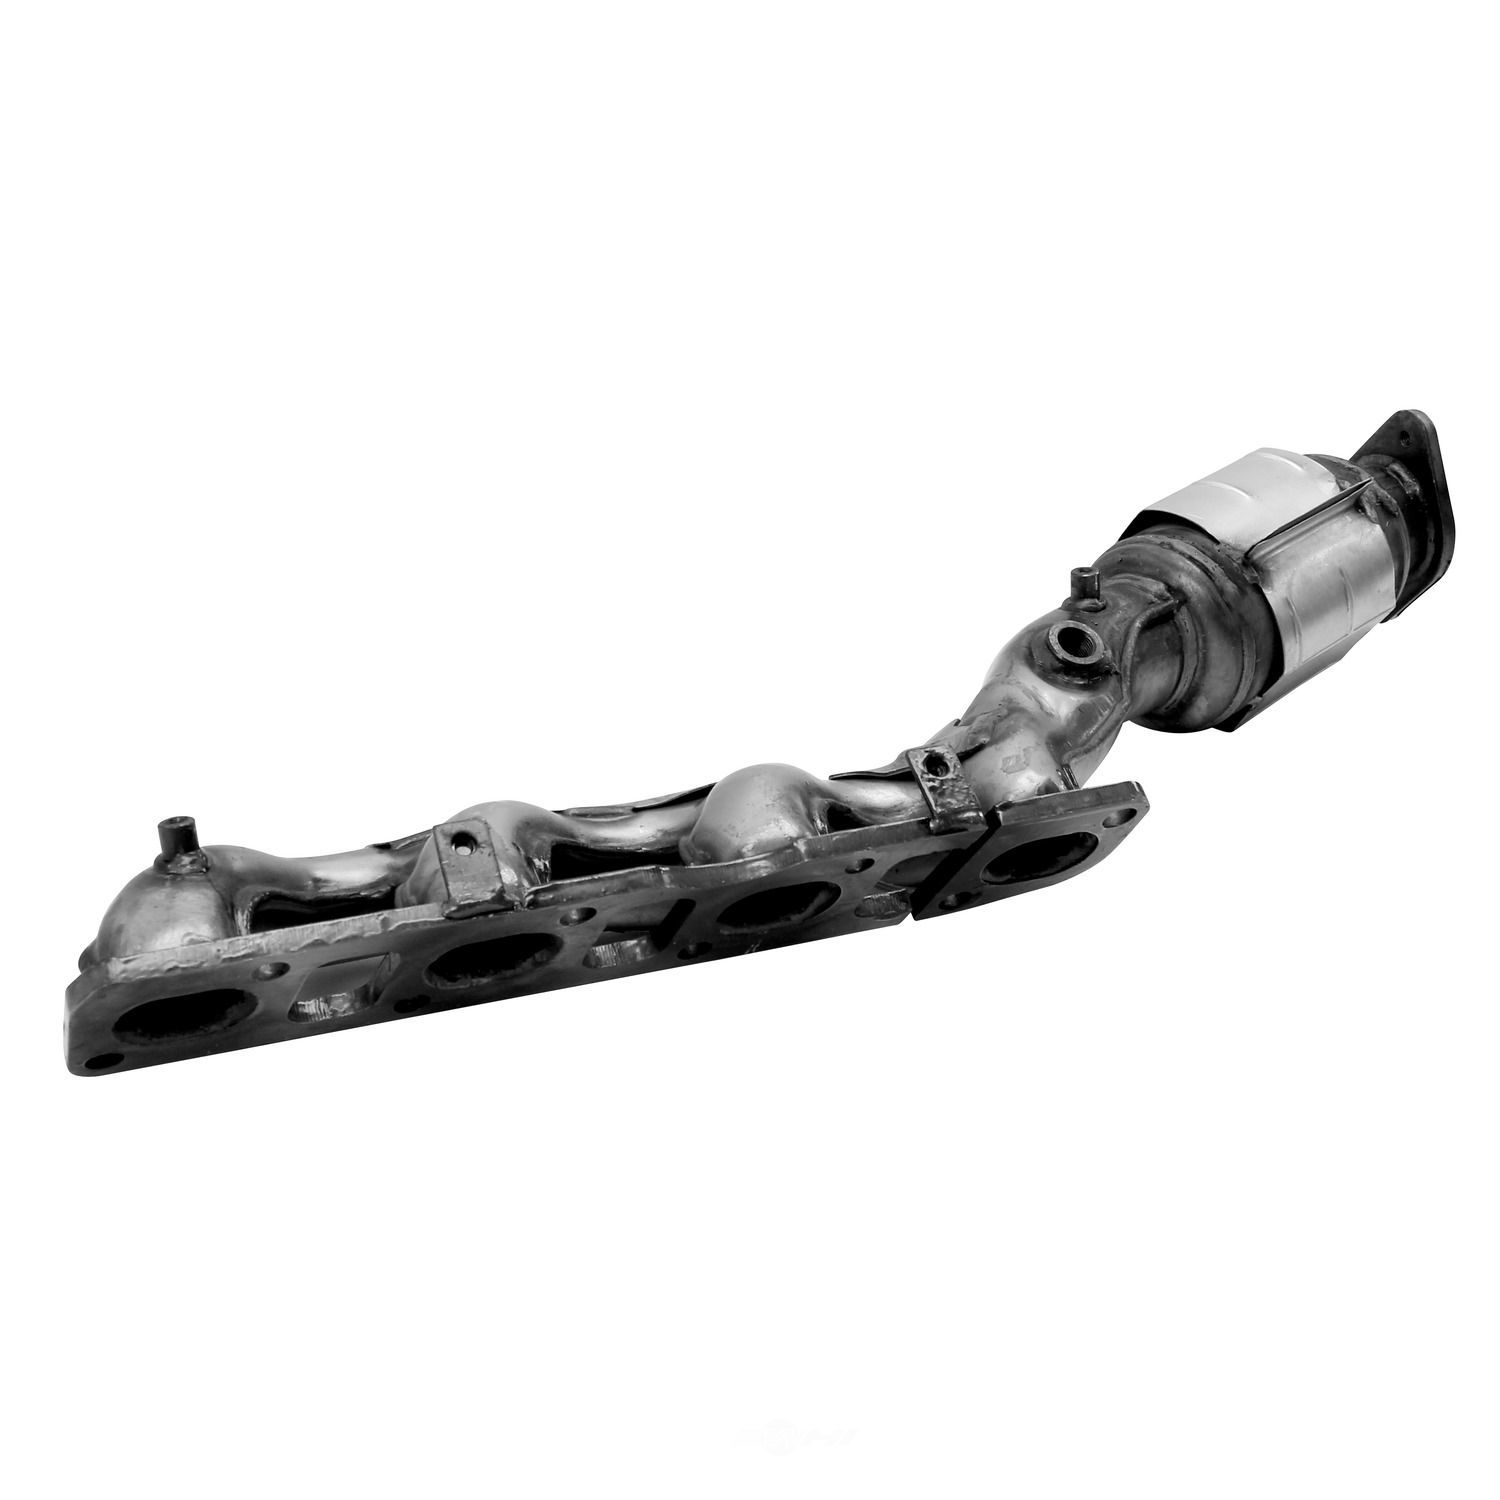 AP EXHAUST W/FEDERAL CONVERTER - Direct Fit Converter w/ Manifold - APF 641354